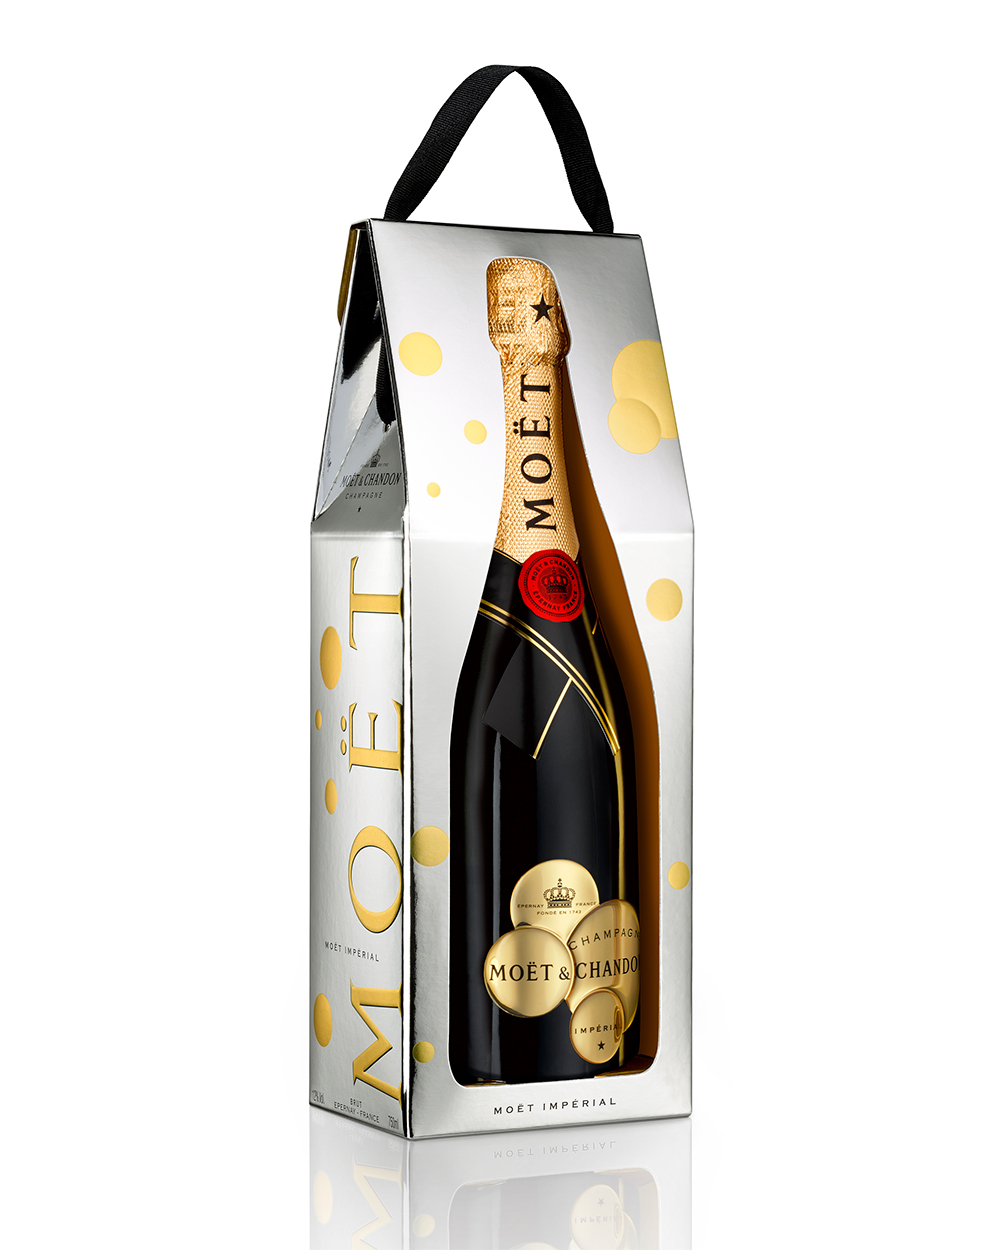 Moët & Chandon So Bubbly limited edition collection champagne, $69.99 exclusively from Glengarry